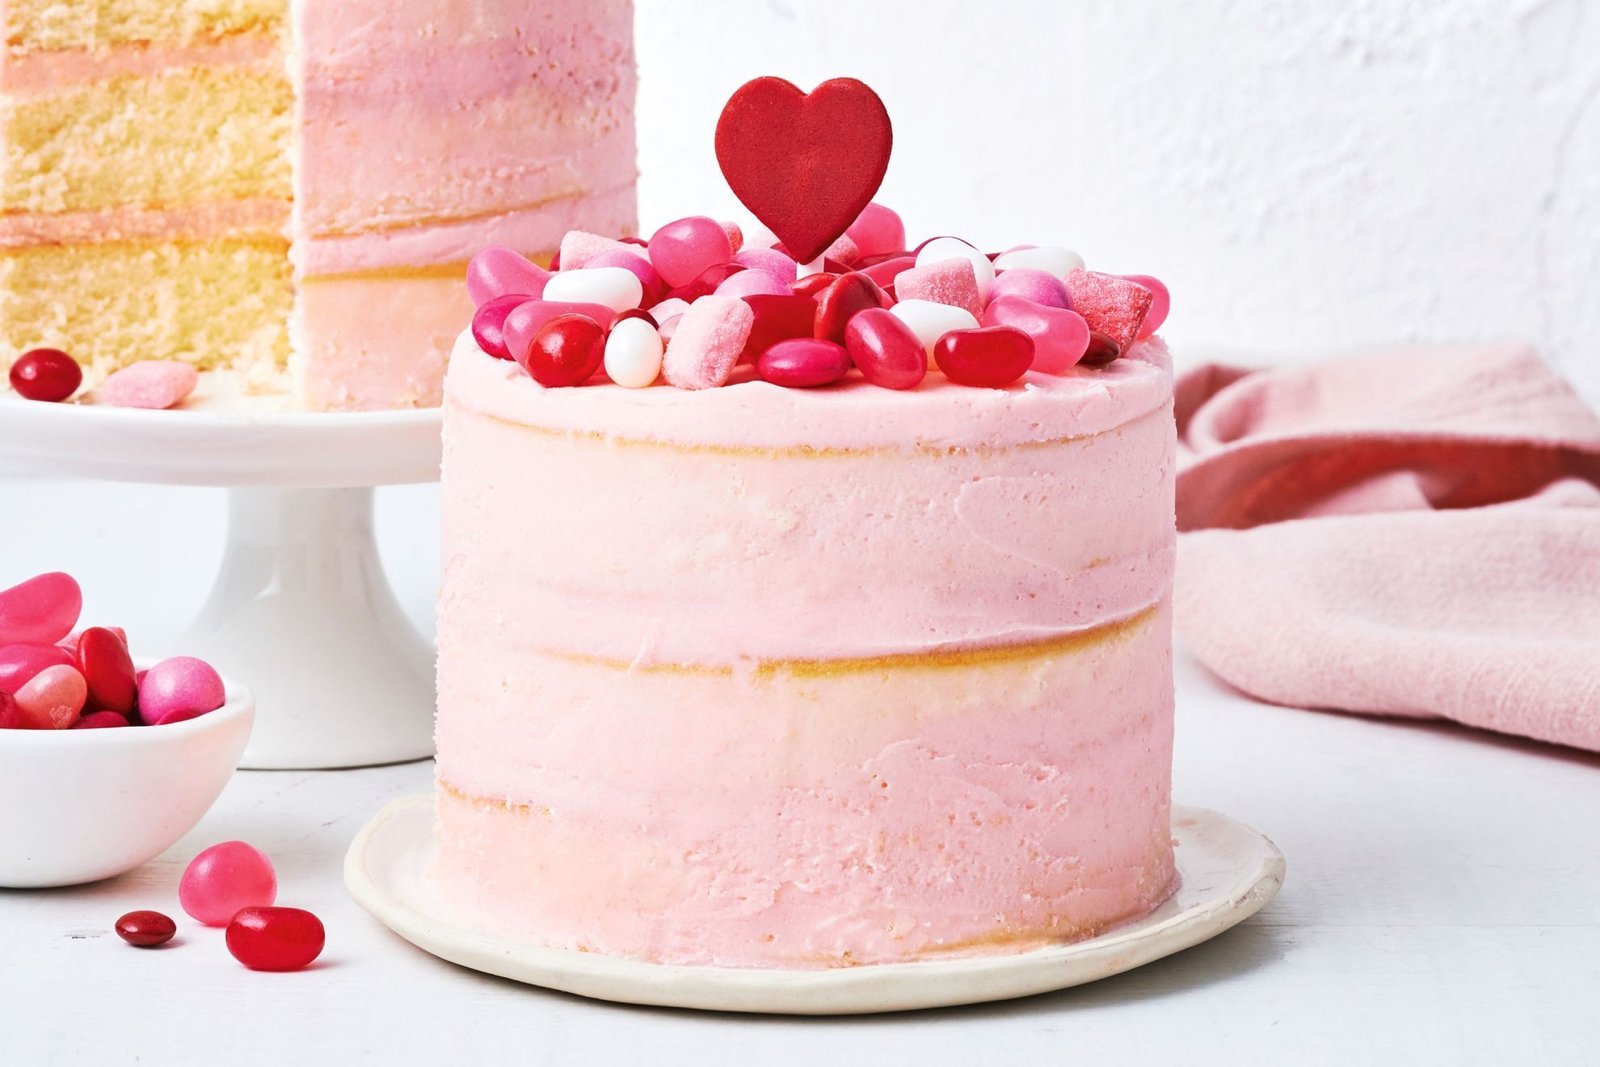 Select Your Valentine Day Cakes From This List Of Amazing Flavors